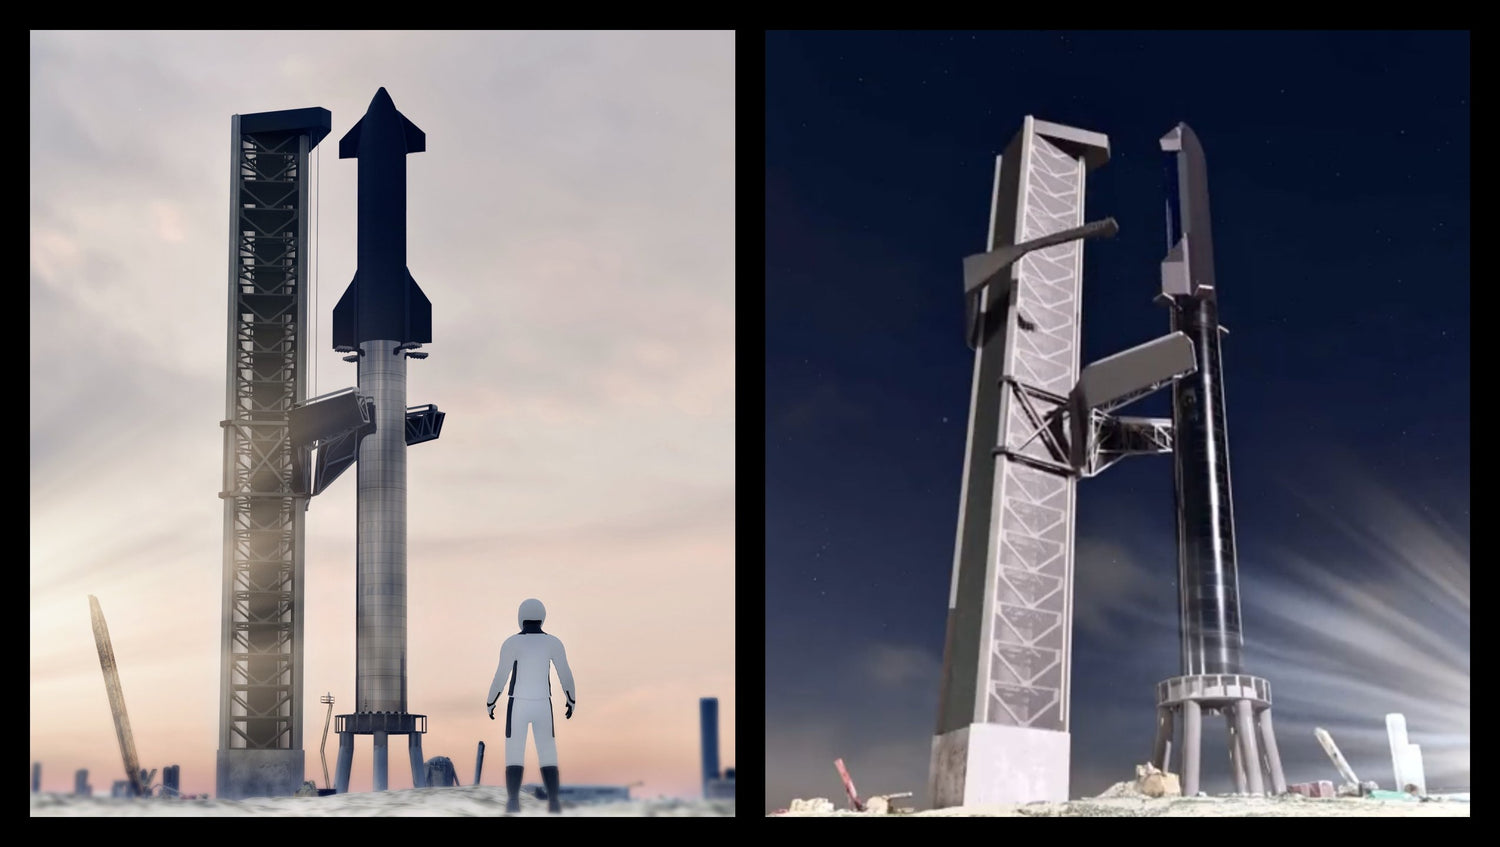 Incredible Render Shows How SpaceX Plans To Catch Starship & Super Heavy Rocket With ‘Mechazilla’